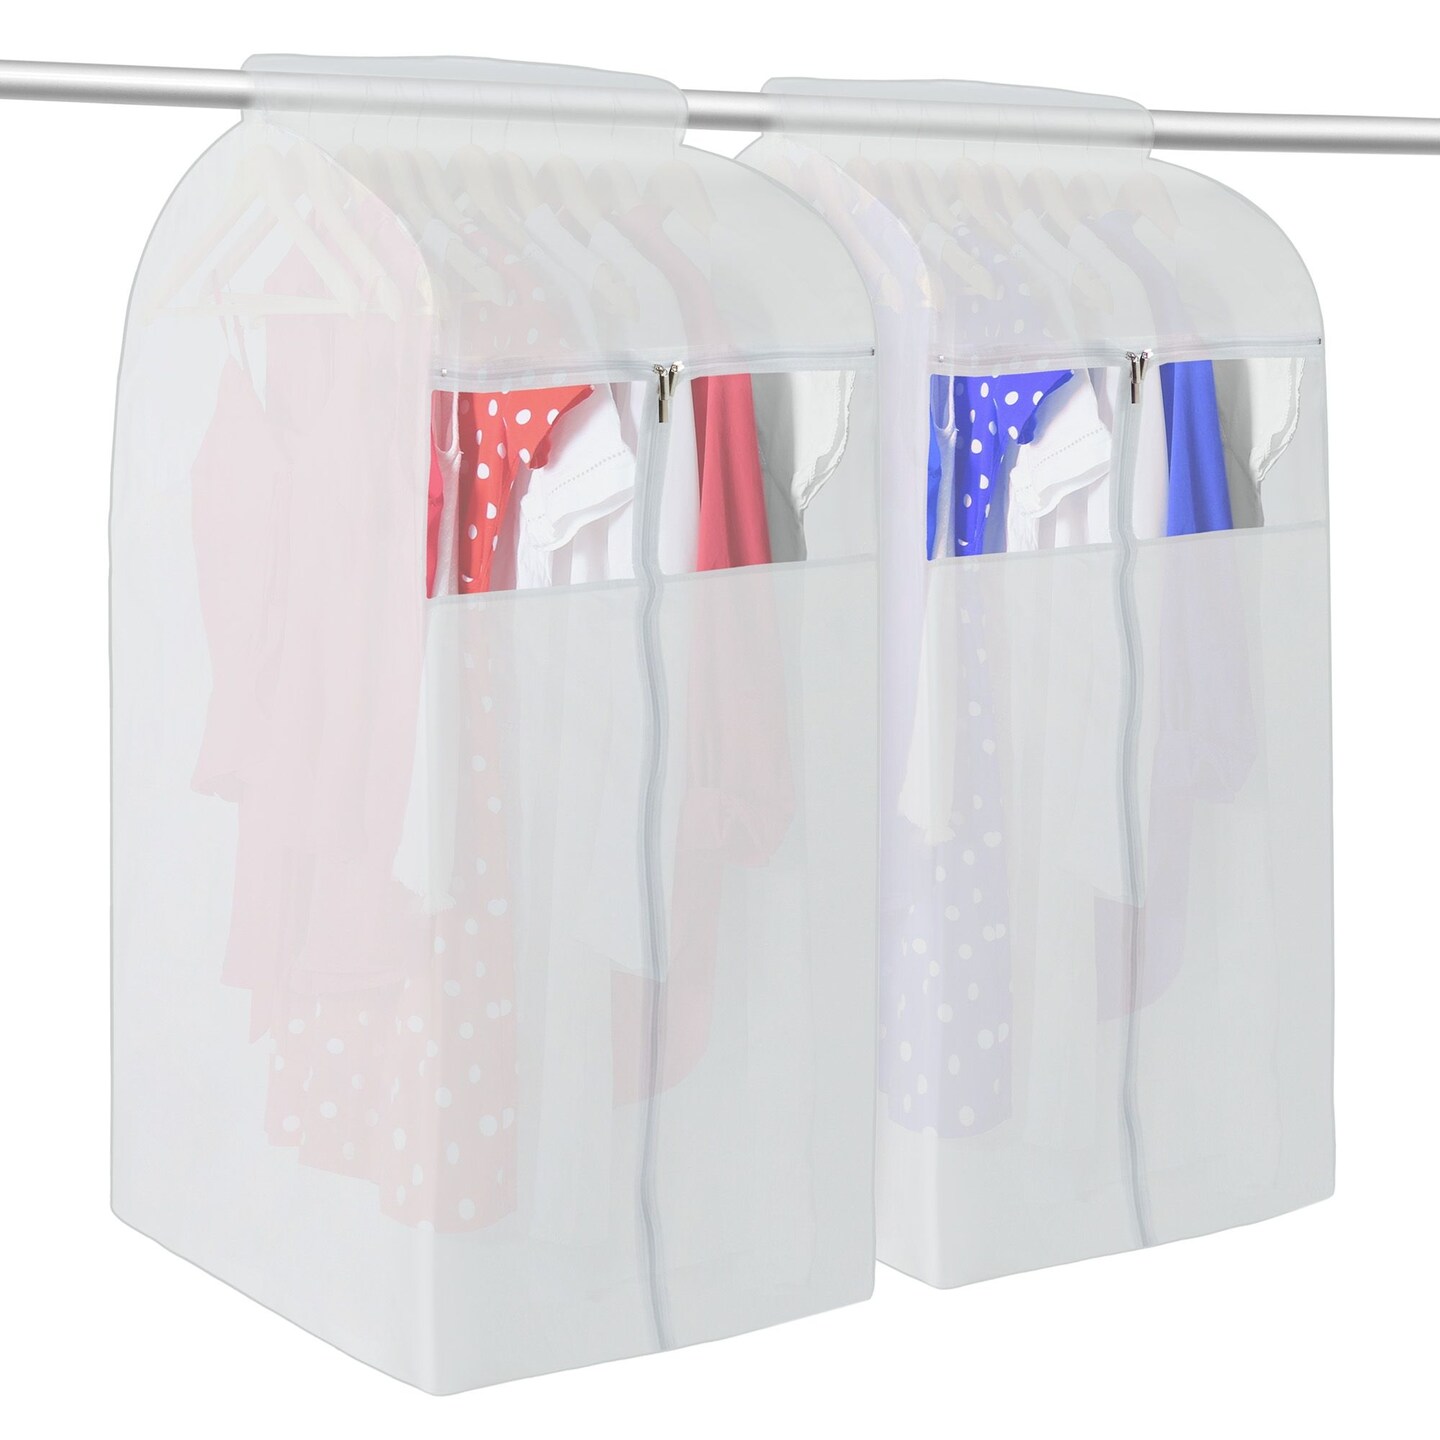 White Garment Bag Covers, Zippered Closet Bags for Clothes (20 x 24 x 54  In, 2 Pack)